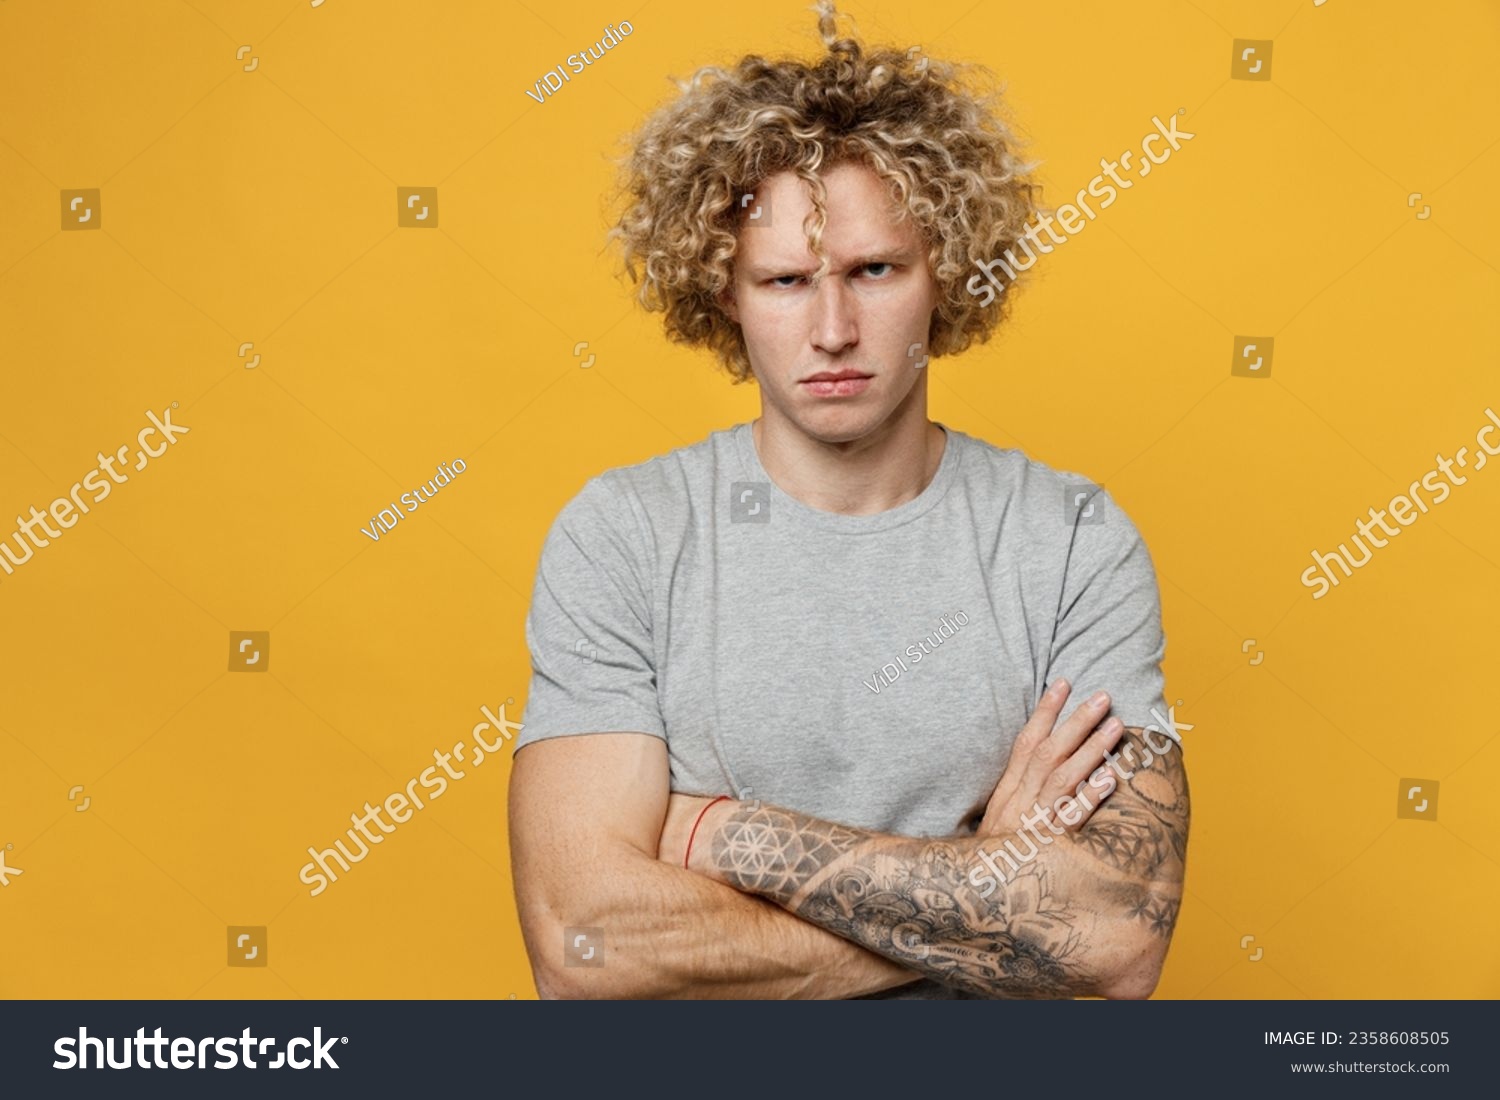 Young sad displeased dissatisfied depressed caucasian man 20s he wear grey t-shirt hold hands crossed folded look camera isolated on plain yellow background studio portrait. People lifestyle concept #2358608505